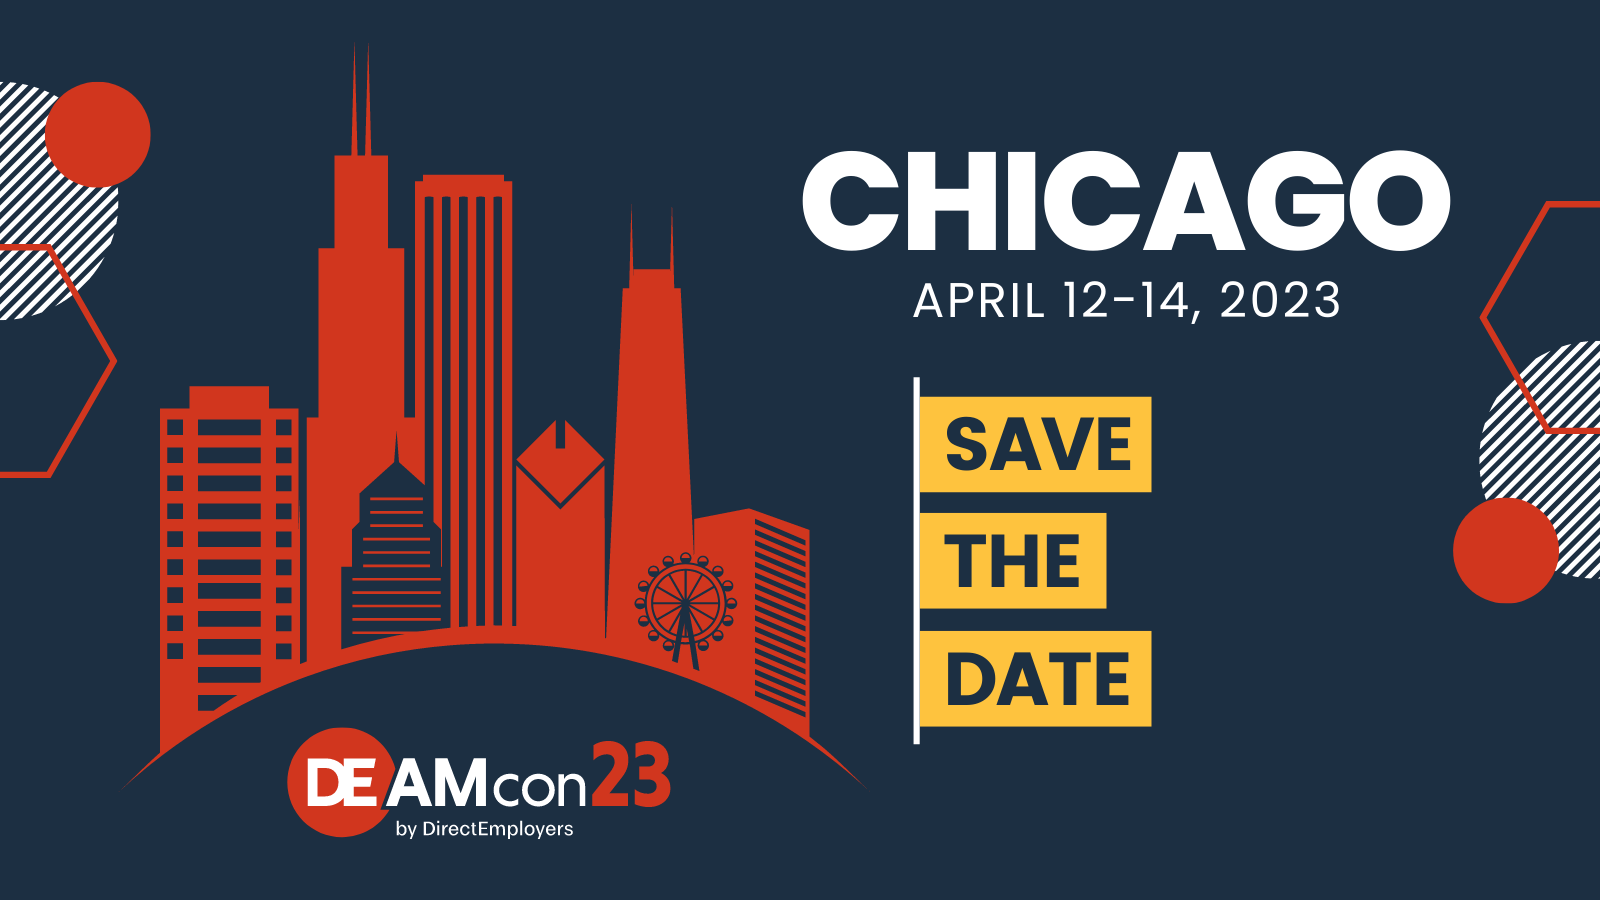 DEAMcon23 Save the Date Chicago April 12-14, 2023